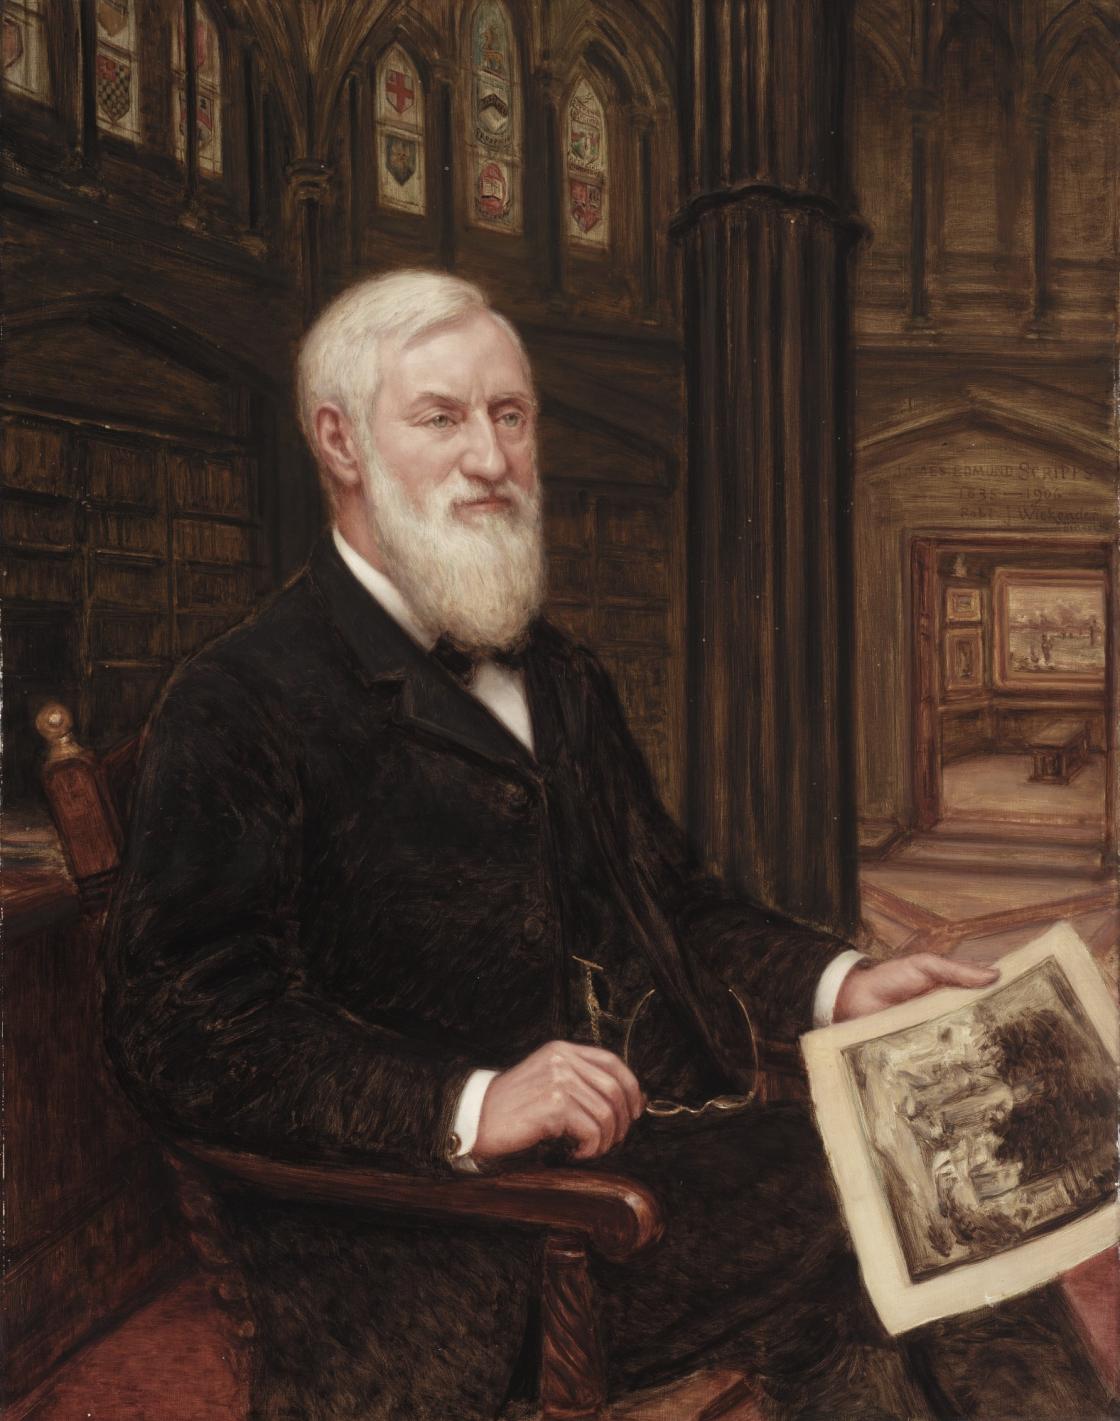 Robert J. Wickenden, James Edmund Scripps, 1907, oil on canvas (58 x 36 inches). Detroit Institute of Arts, Gift of the Estate of James E. Scripps, 07.2. Photography Courtesy The Detroit Institute of Arts.